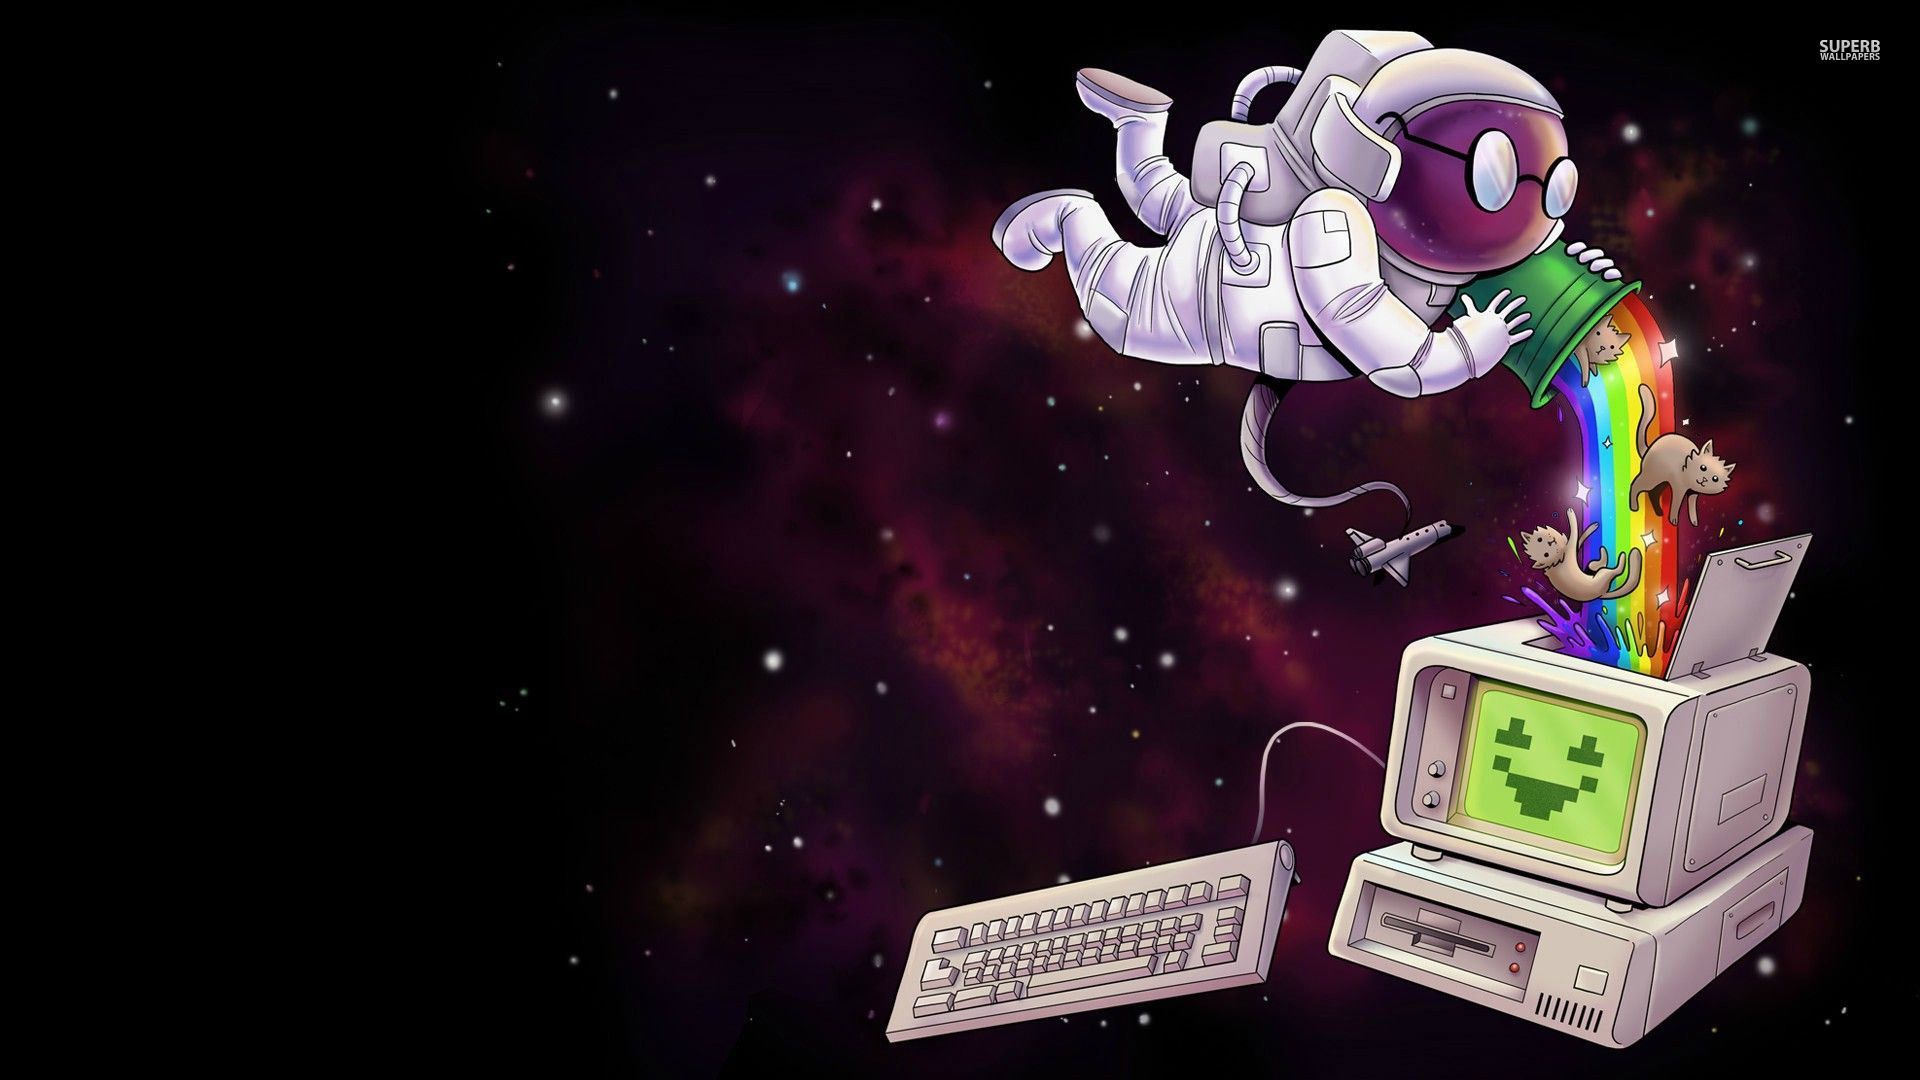 Astronaut gathering nyan cats in a computer wallpaper - Funny ...